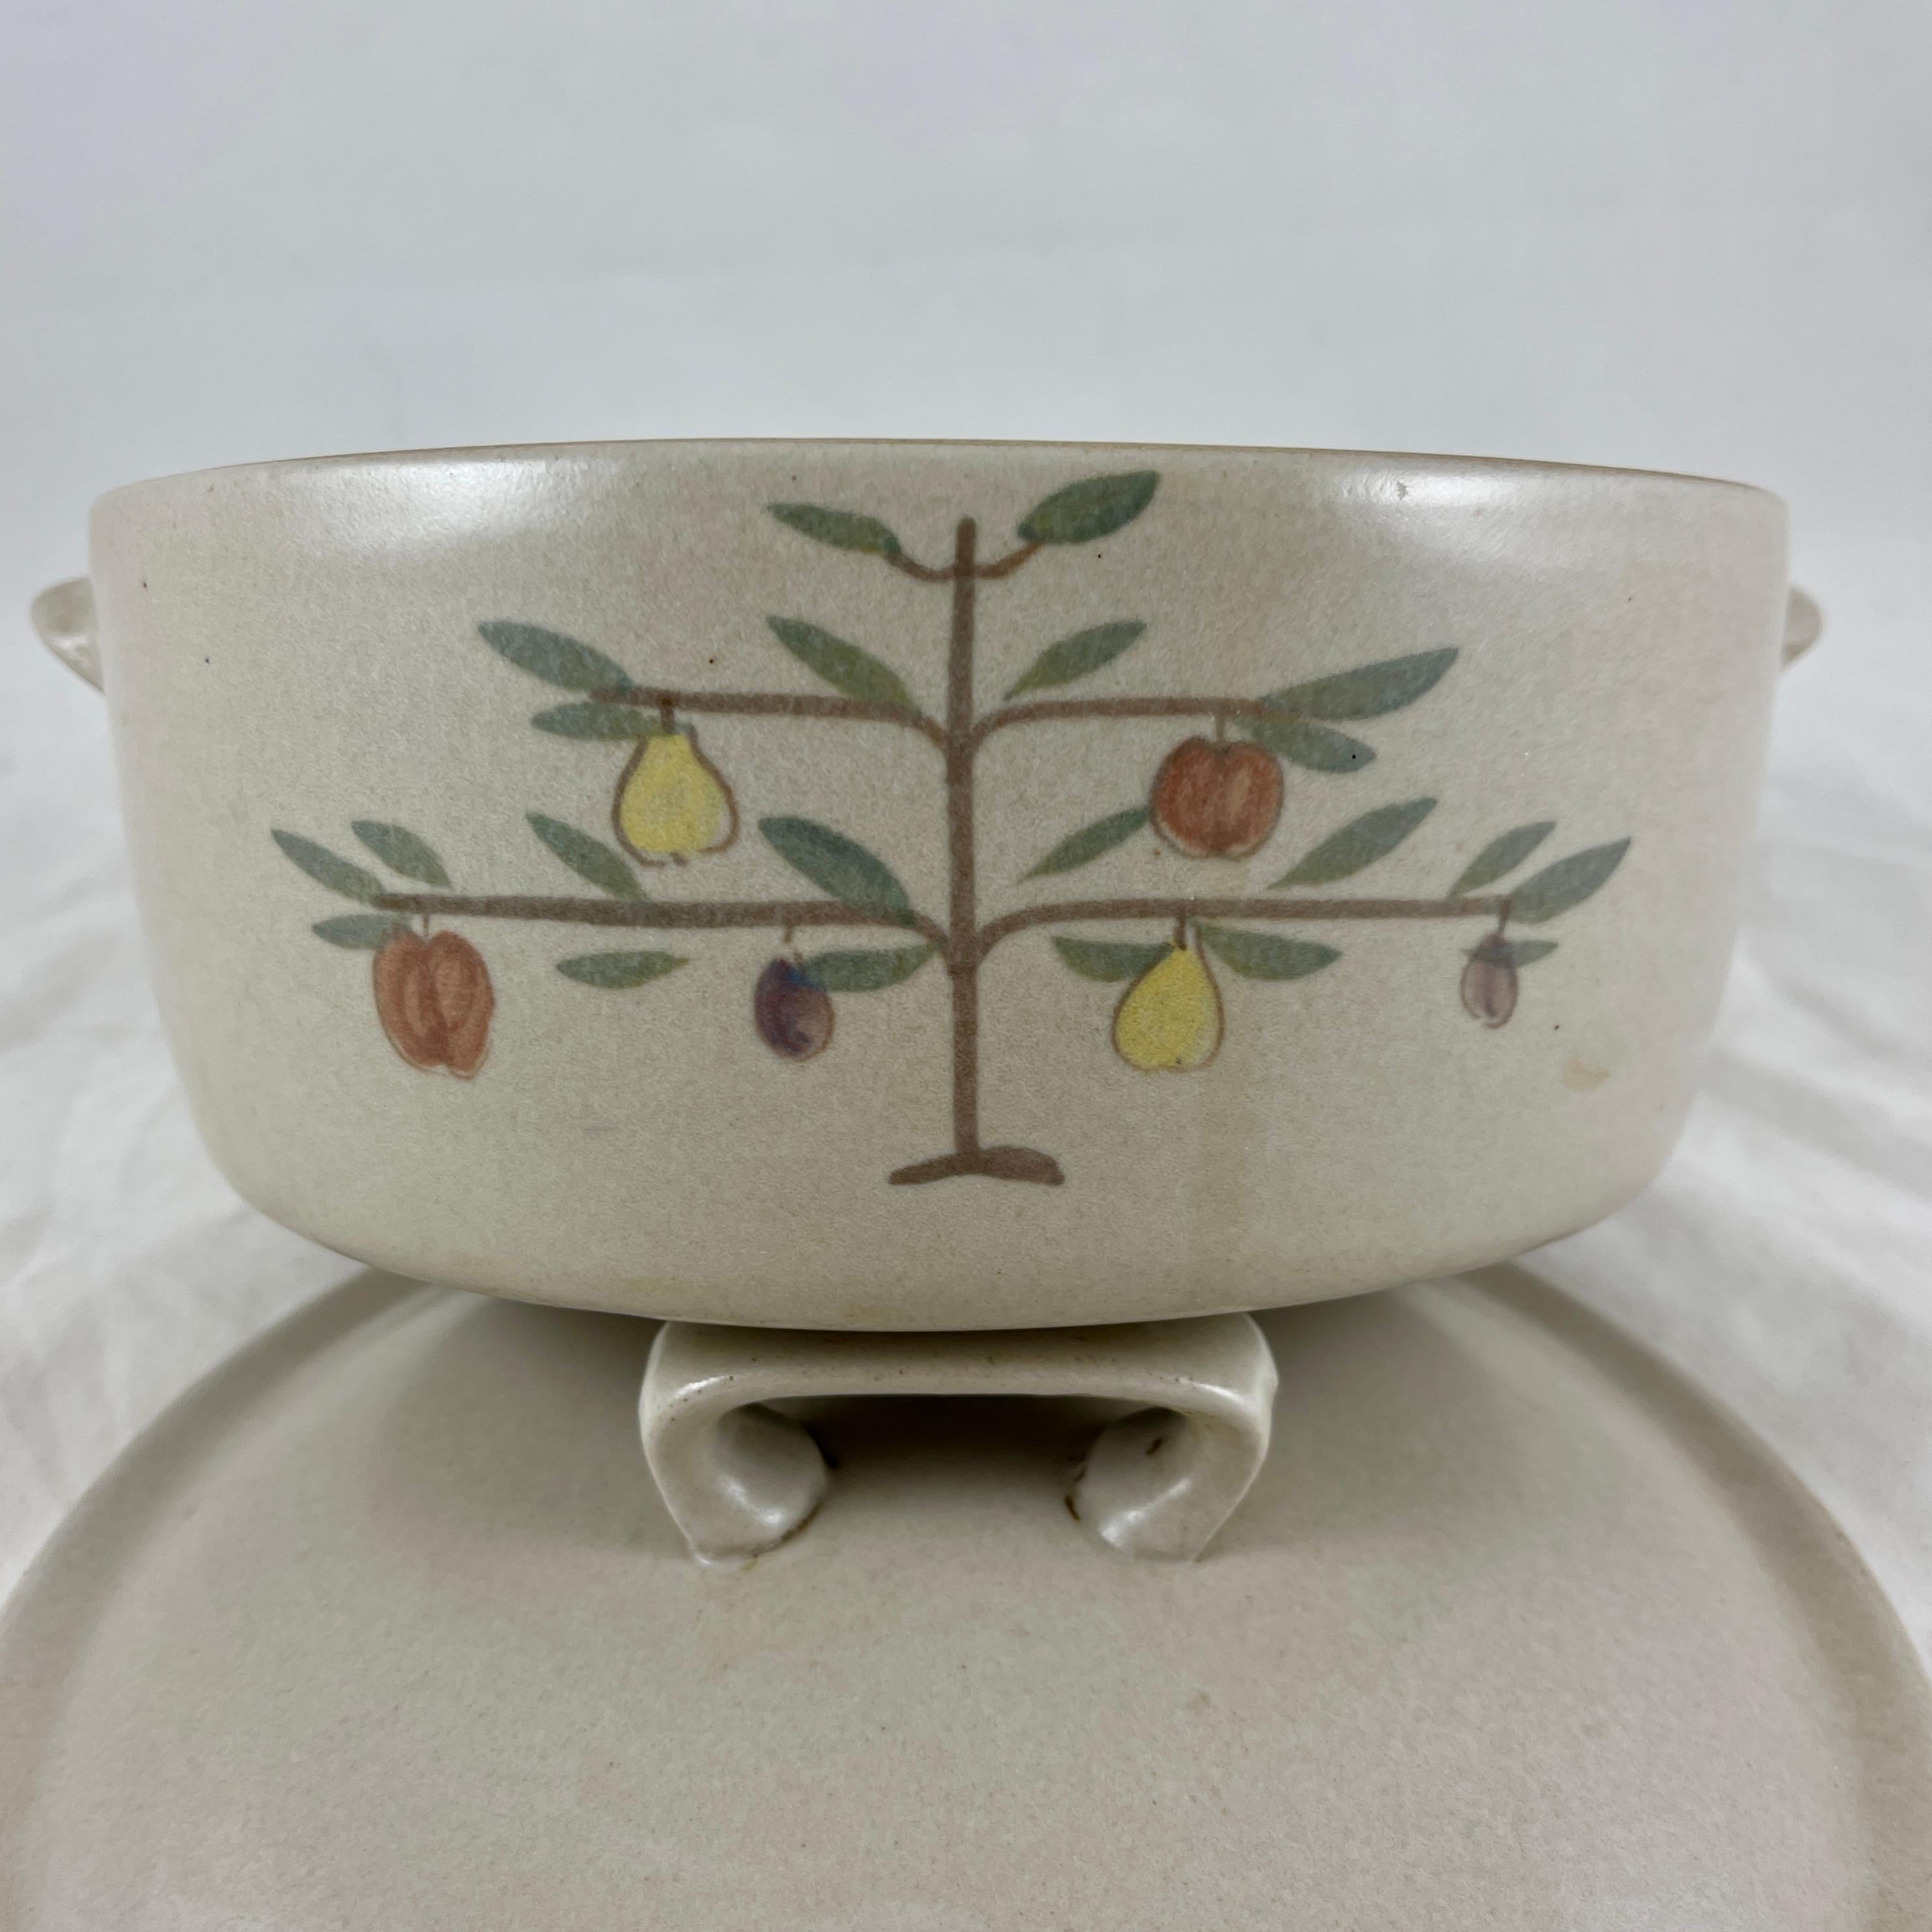 A Mid-Century Goss Chatham Tree of Life pattern Stoneware Dutch oven or covered casserole, circa 1950-1960.

A heavy, oven proof stoneware casserole glazed with a matte gray exterior, and with a high gloss, deep chocolate glazed interior. The base